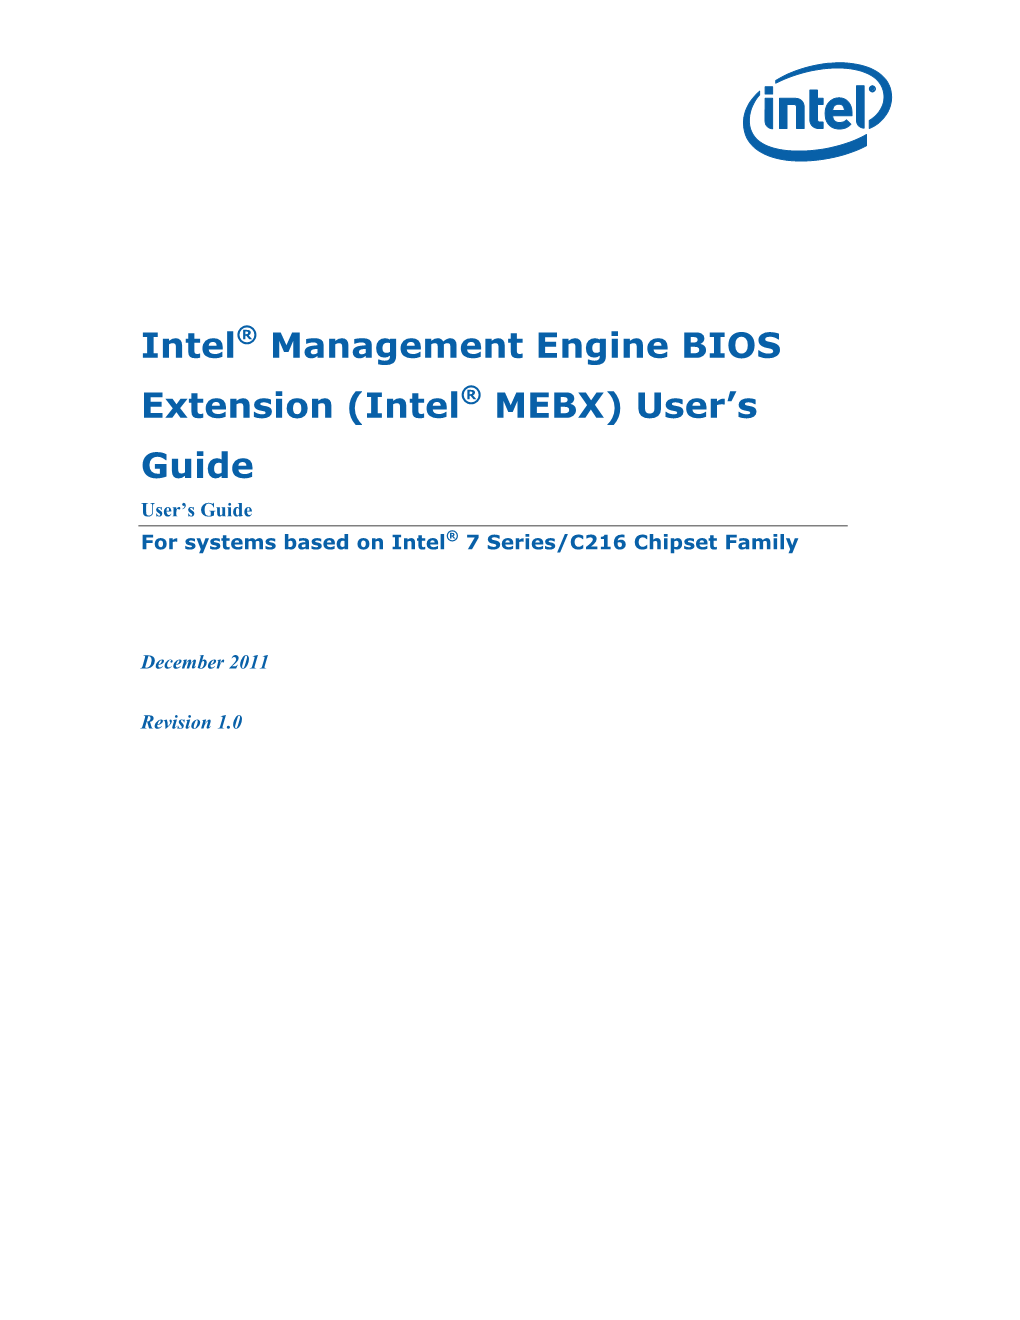 Intel® Management Engine BIOS Extension (Intel® MEBX) User's Guide User's Guide for Systems Based on Intel® 7 Series Chip